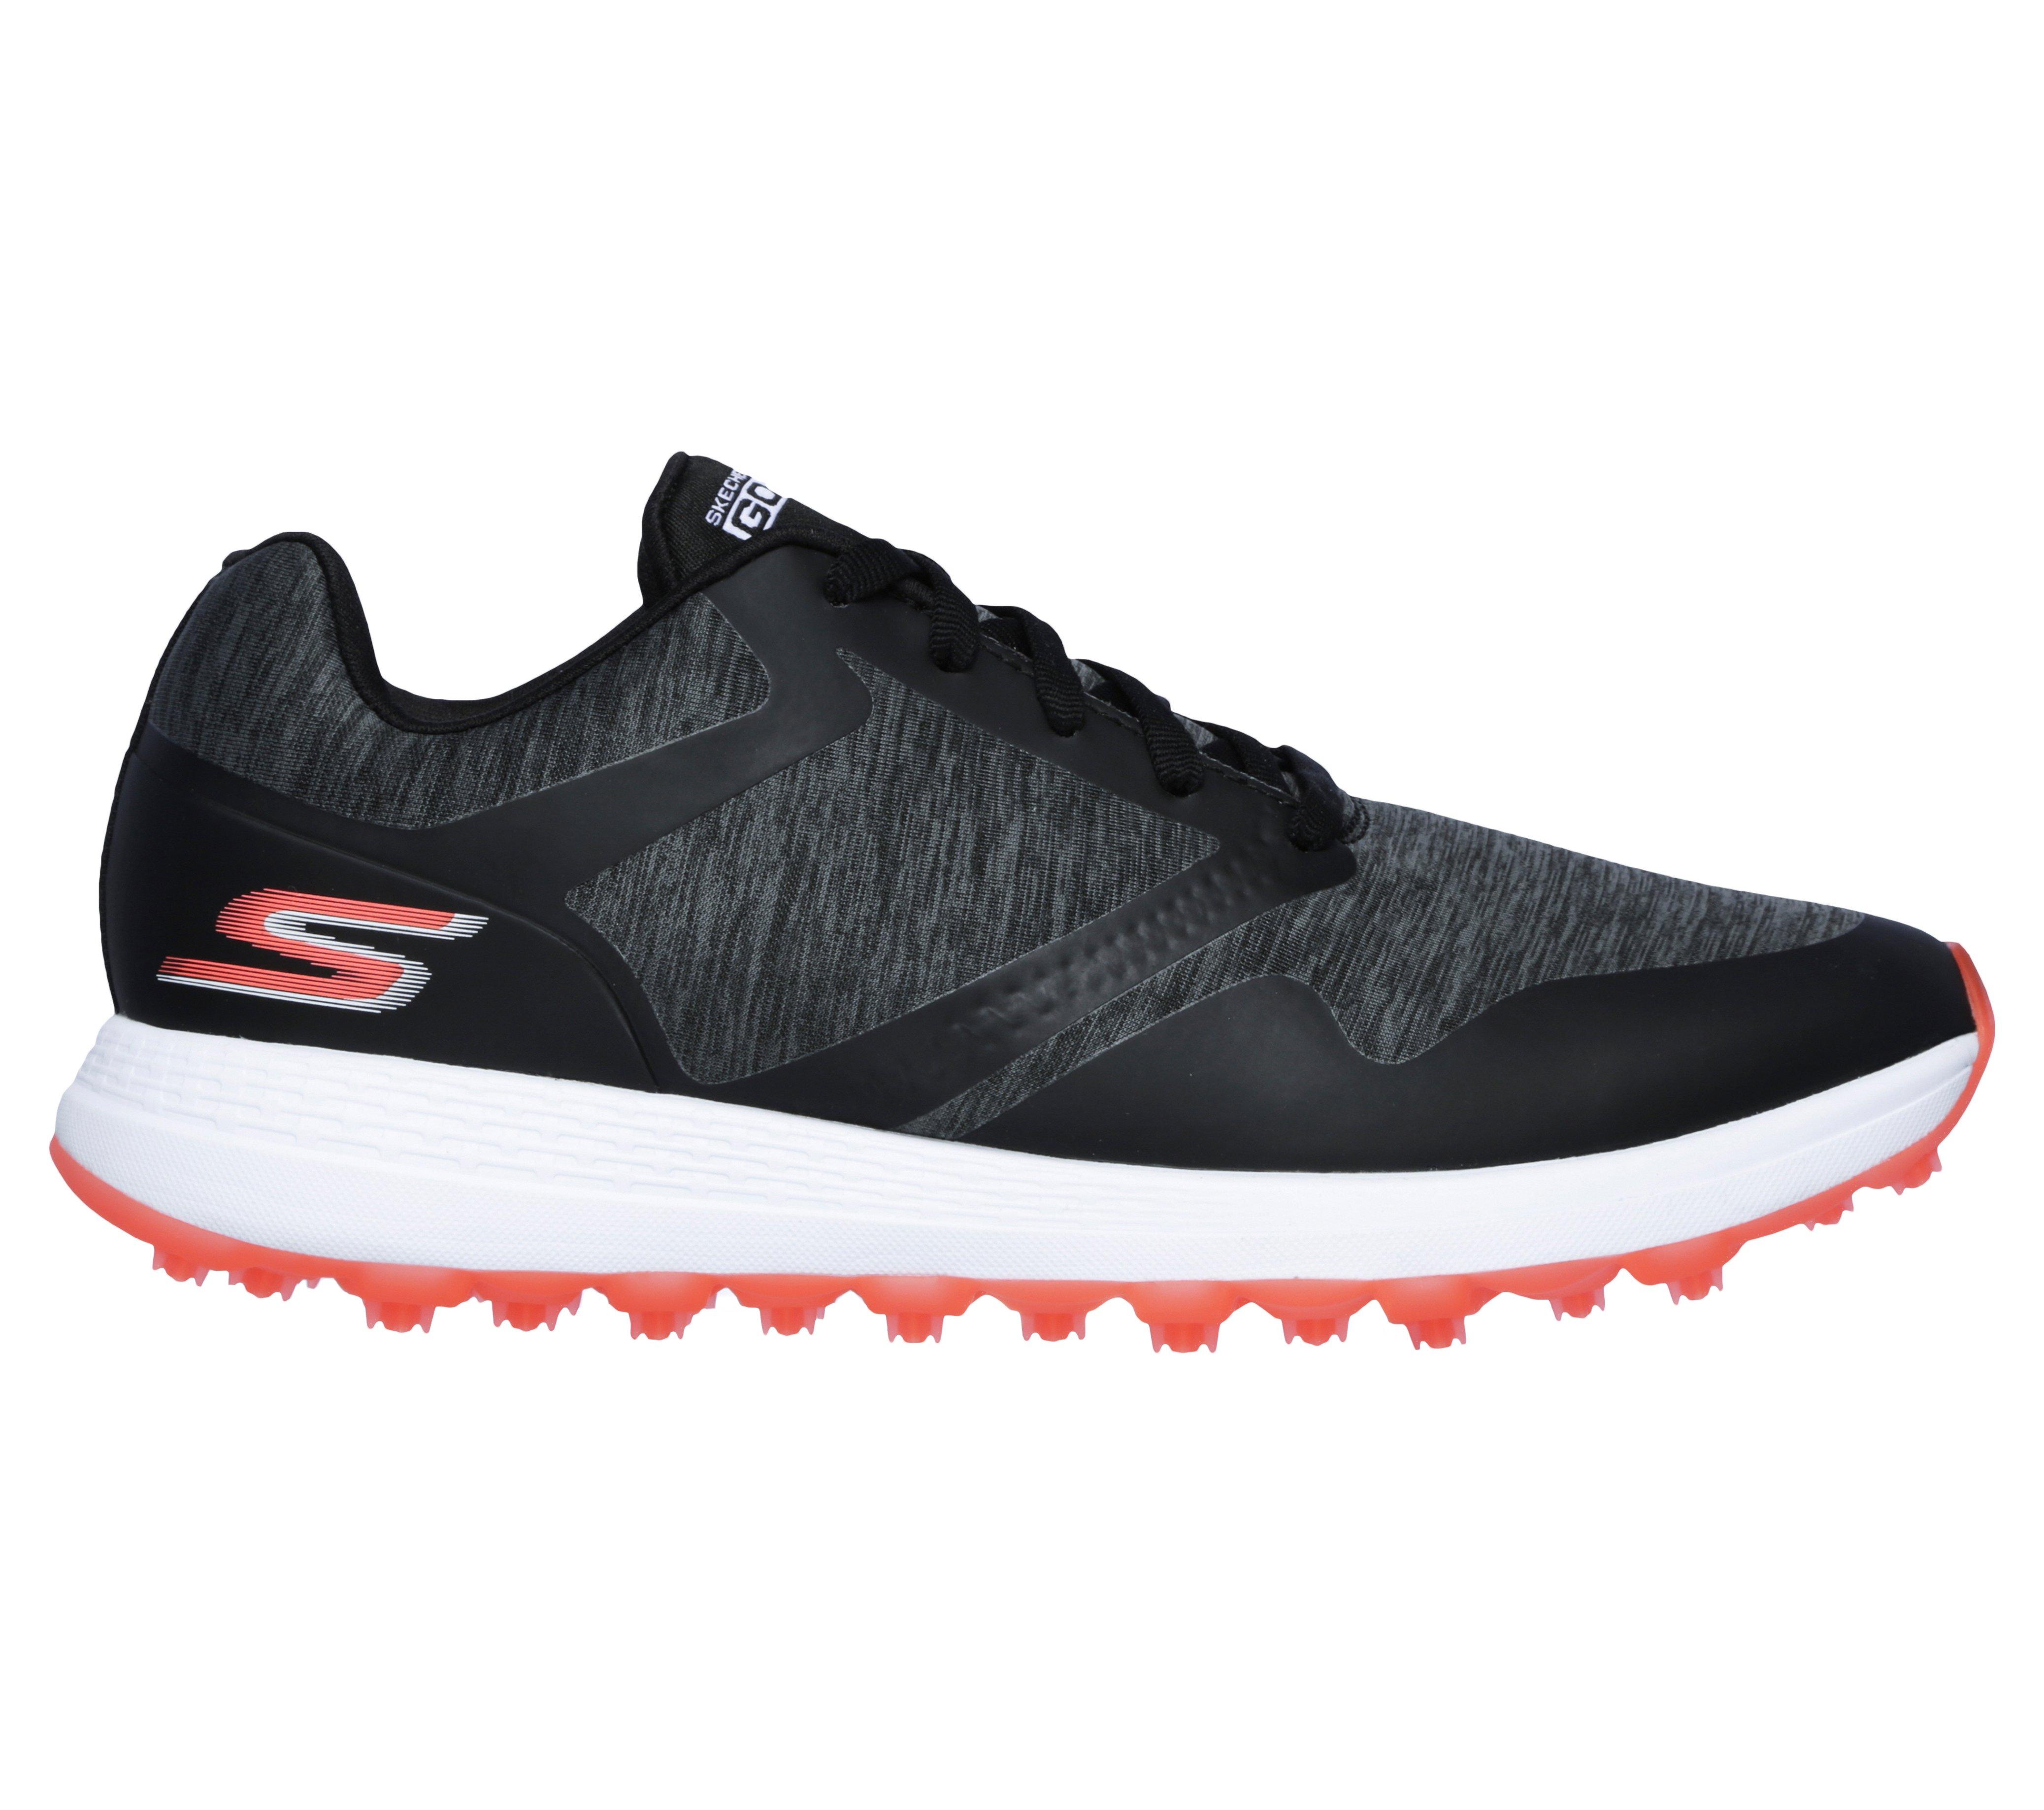 skechers canada golf shoes